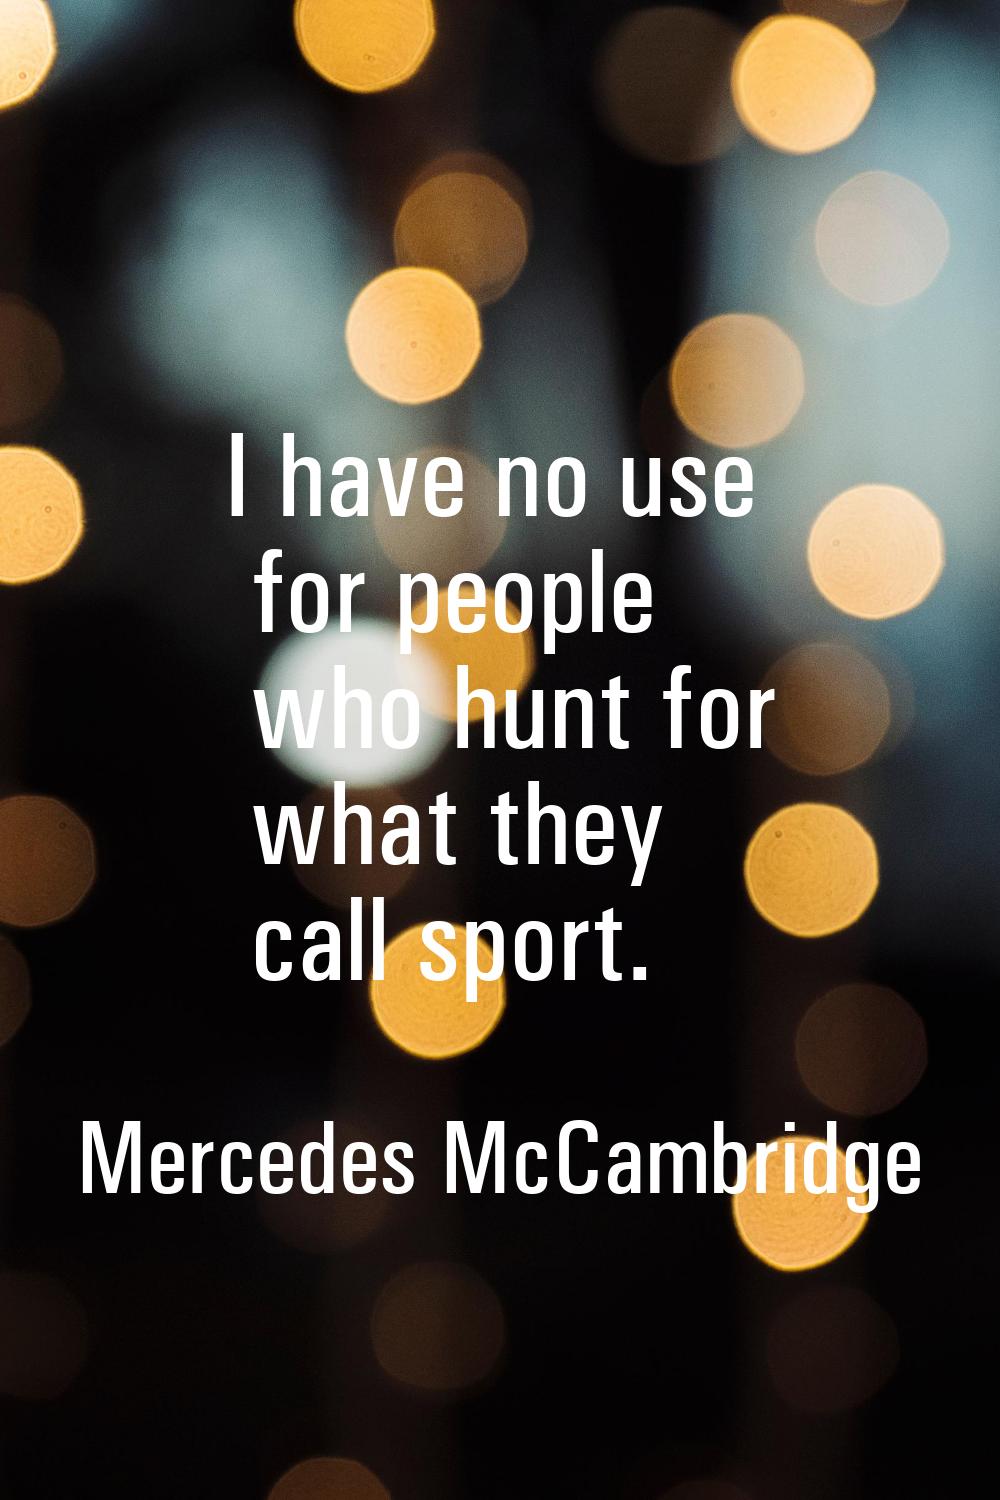 I have no use for people who hunt for what they call sport.